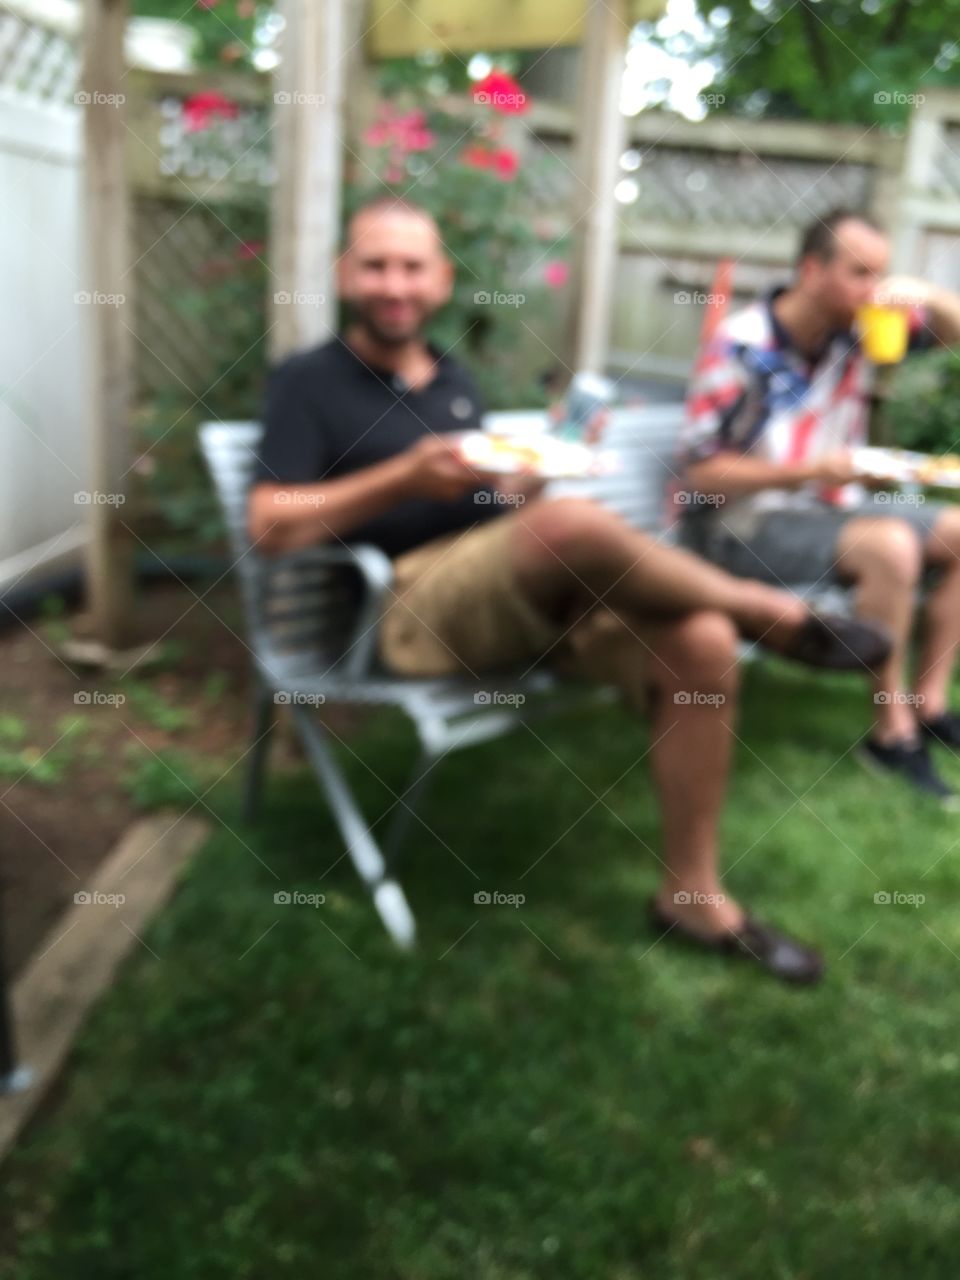 Out of focus BBQ